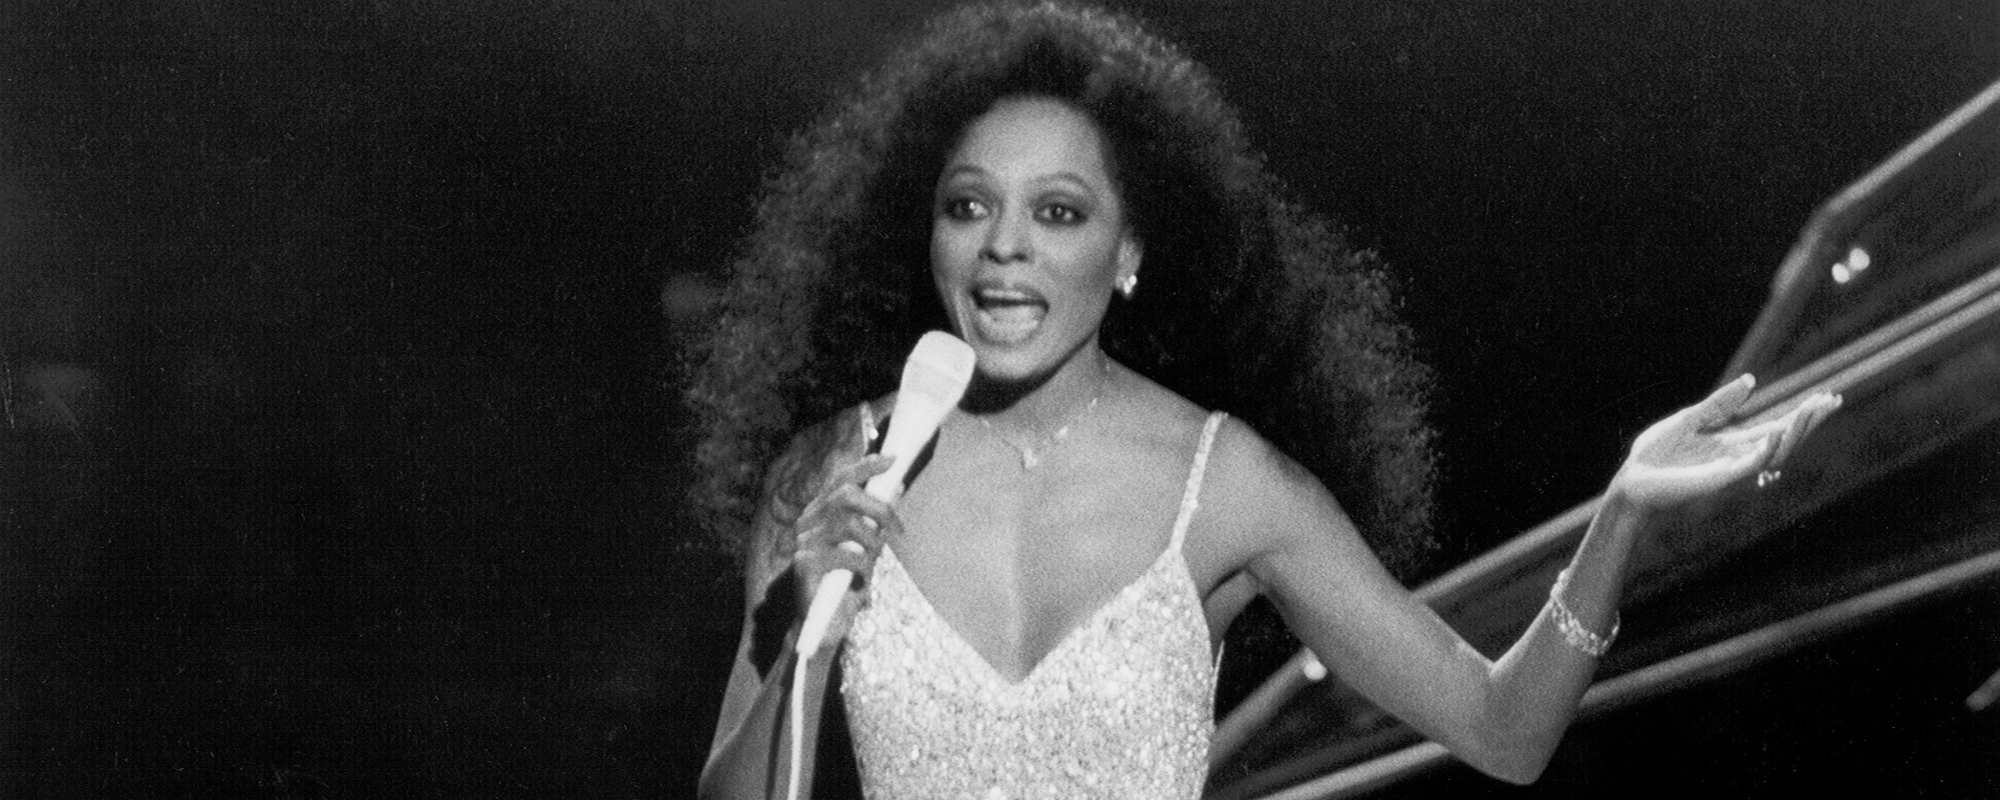 Remember When Diana Ross Revived Her Career With Help from Chic and…Gene Simmons?